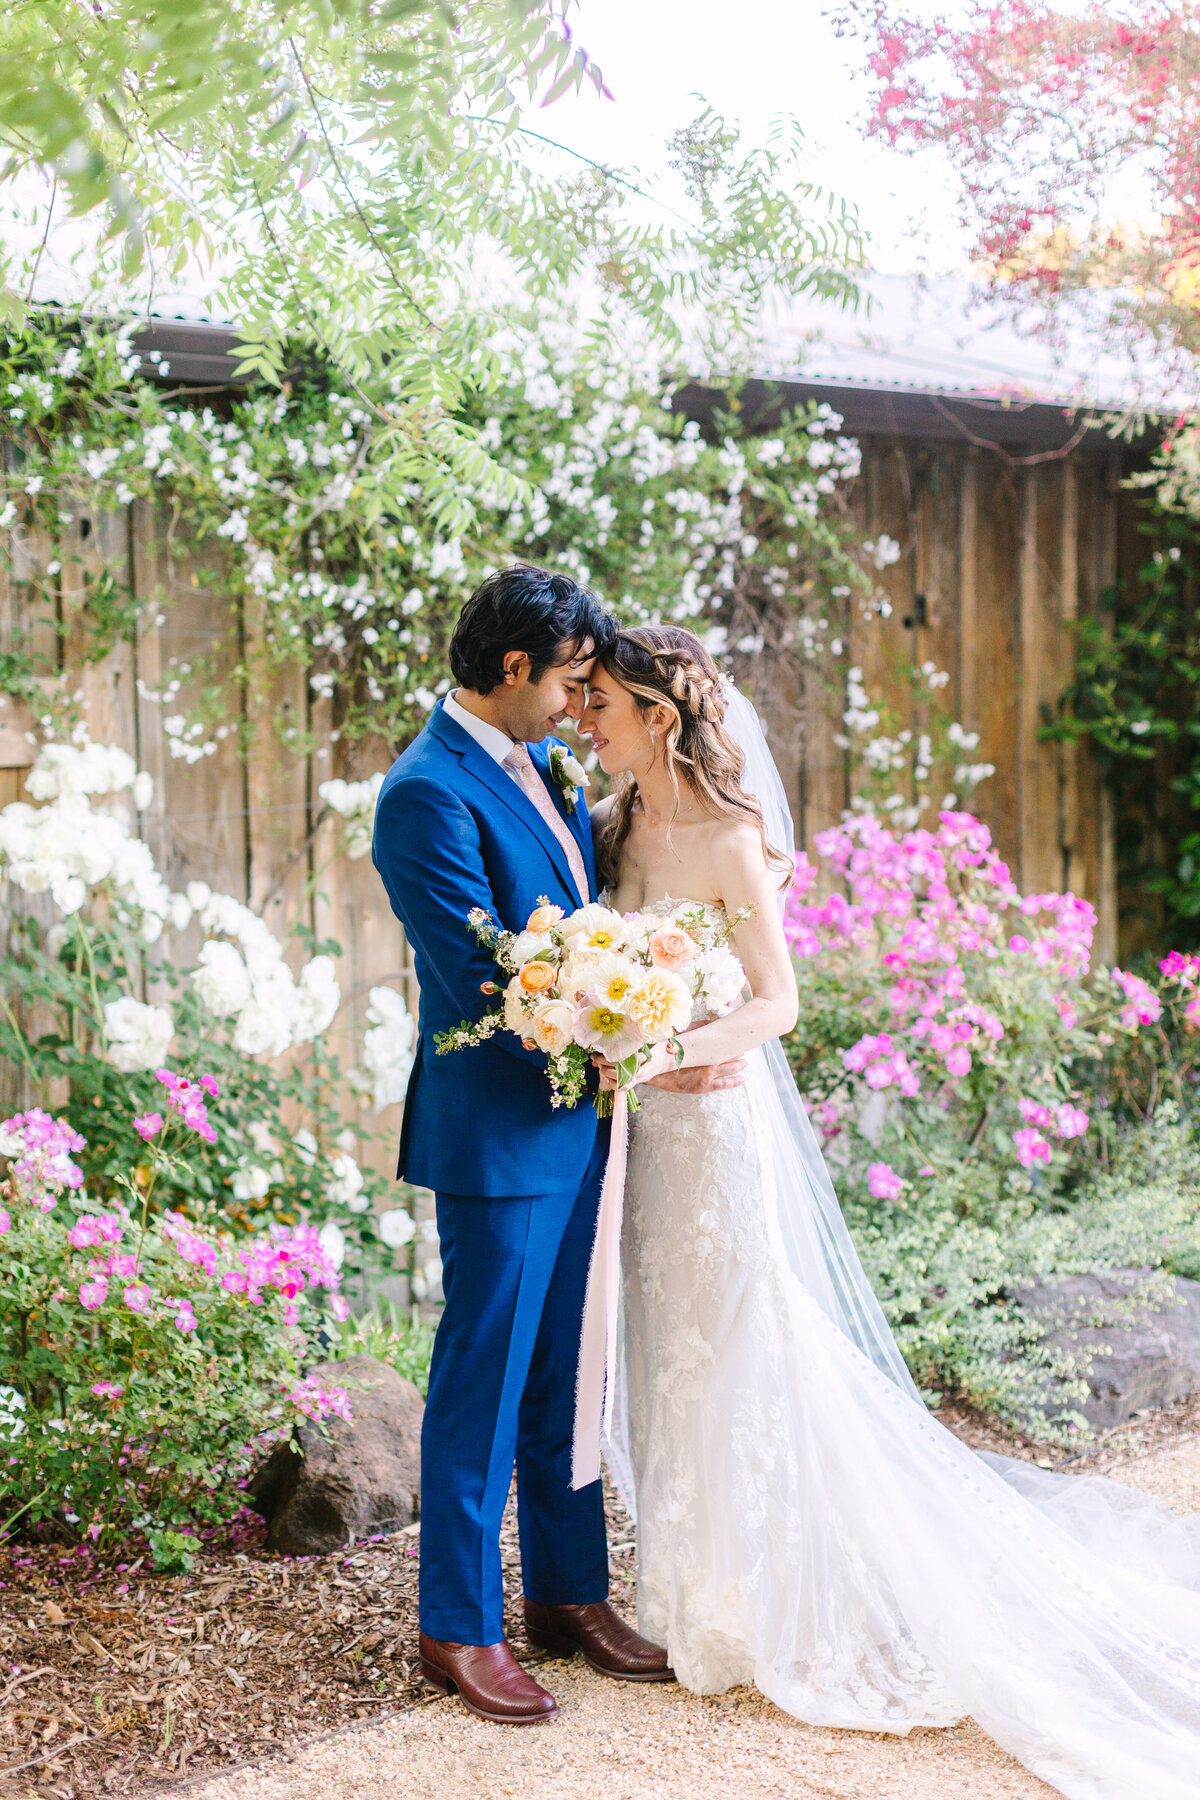 groom in blue suit and bride in white dress with floral bouquet embracing in flower garden.